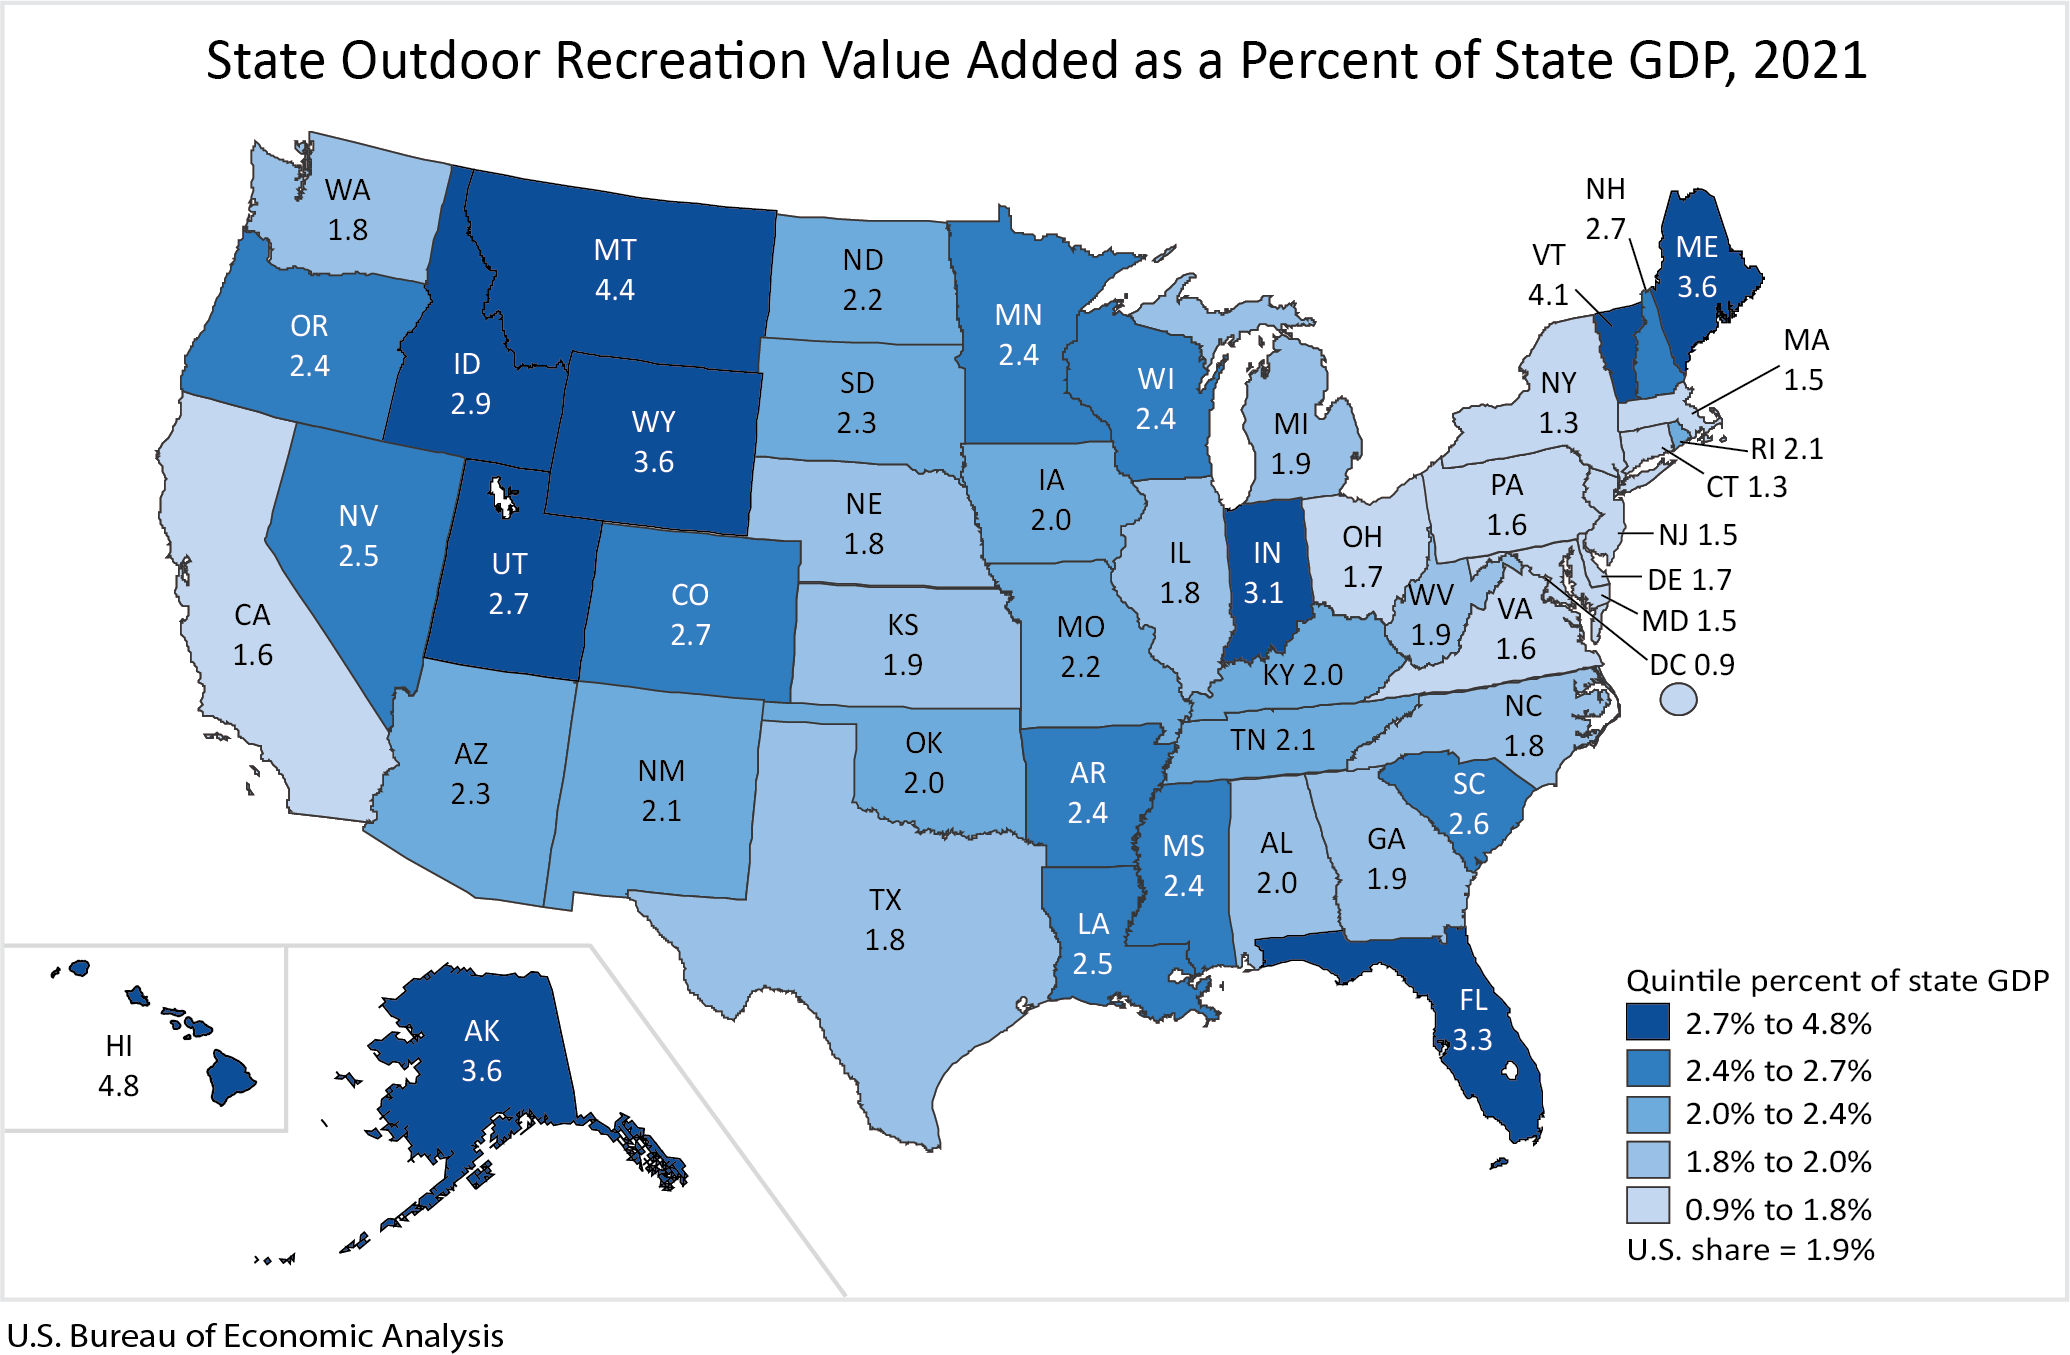 Outdoor recreation as percentage of state GDP - credit U.S. BEA